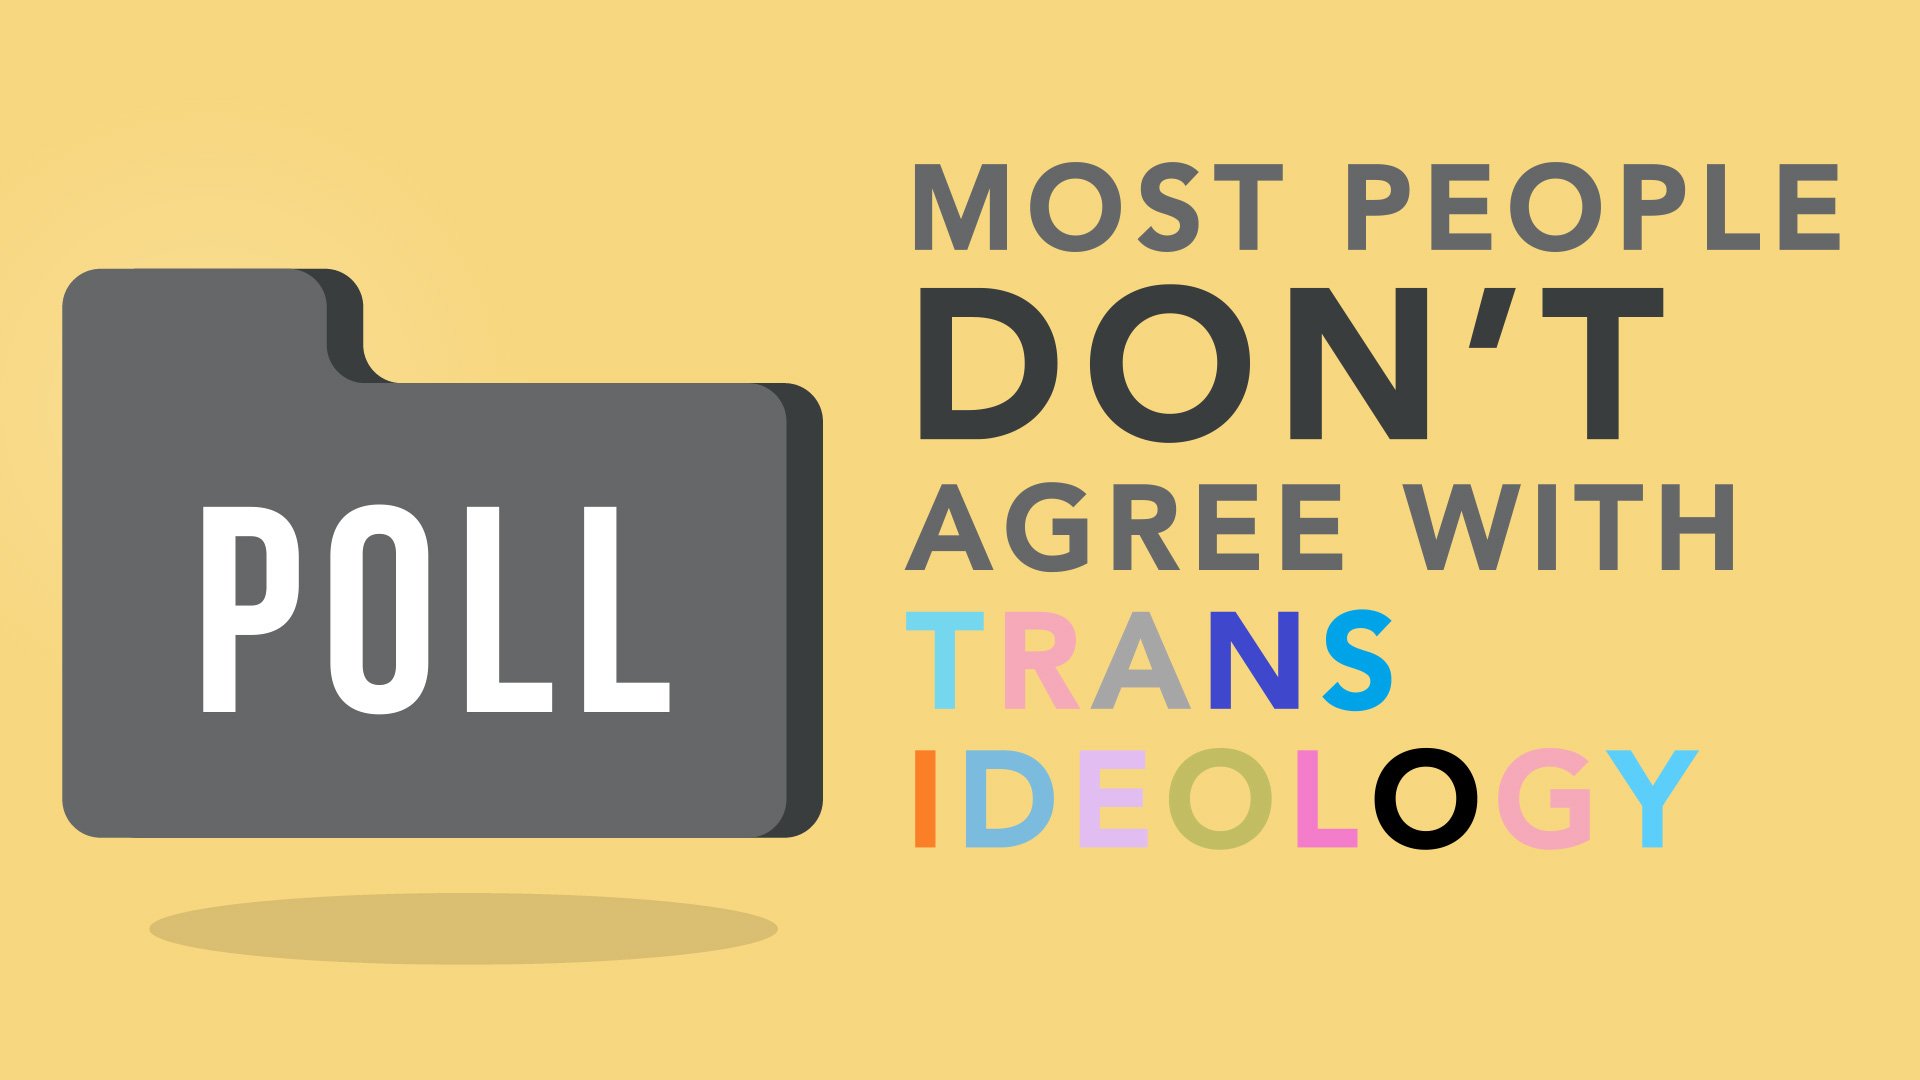 Most People DON’T Agree with Trans Ideology